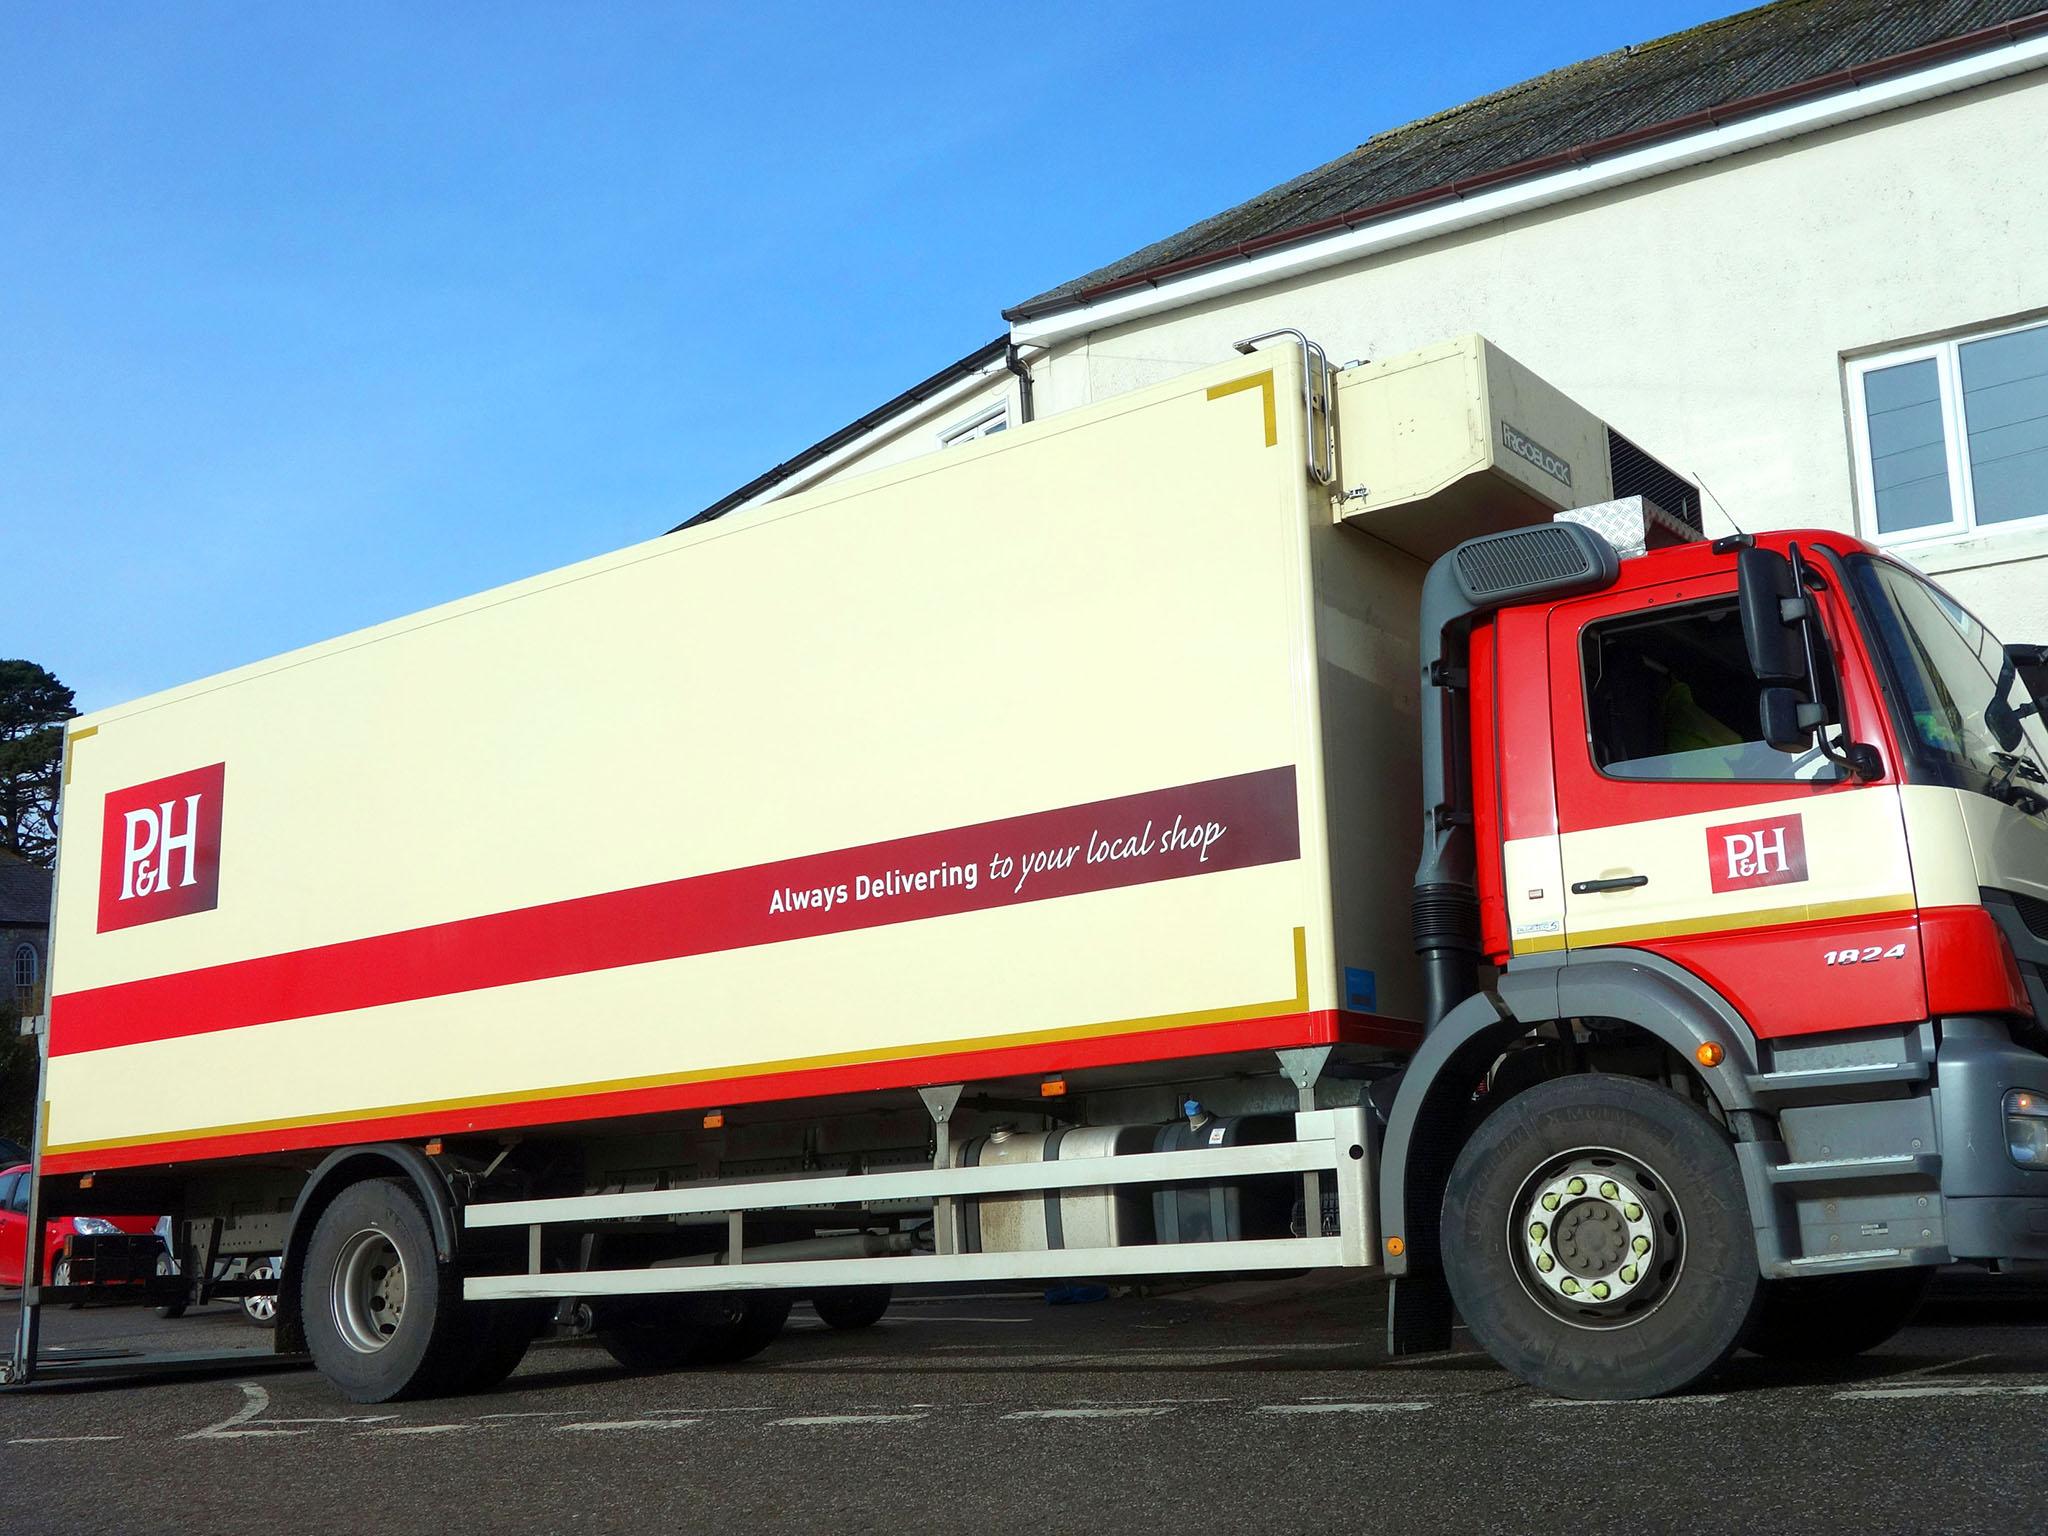 P&H employs 4,000 people and is the UK's biggest delivered wholesaler